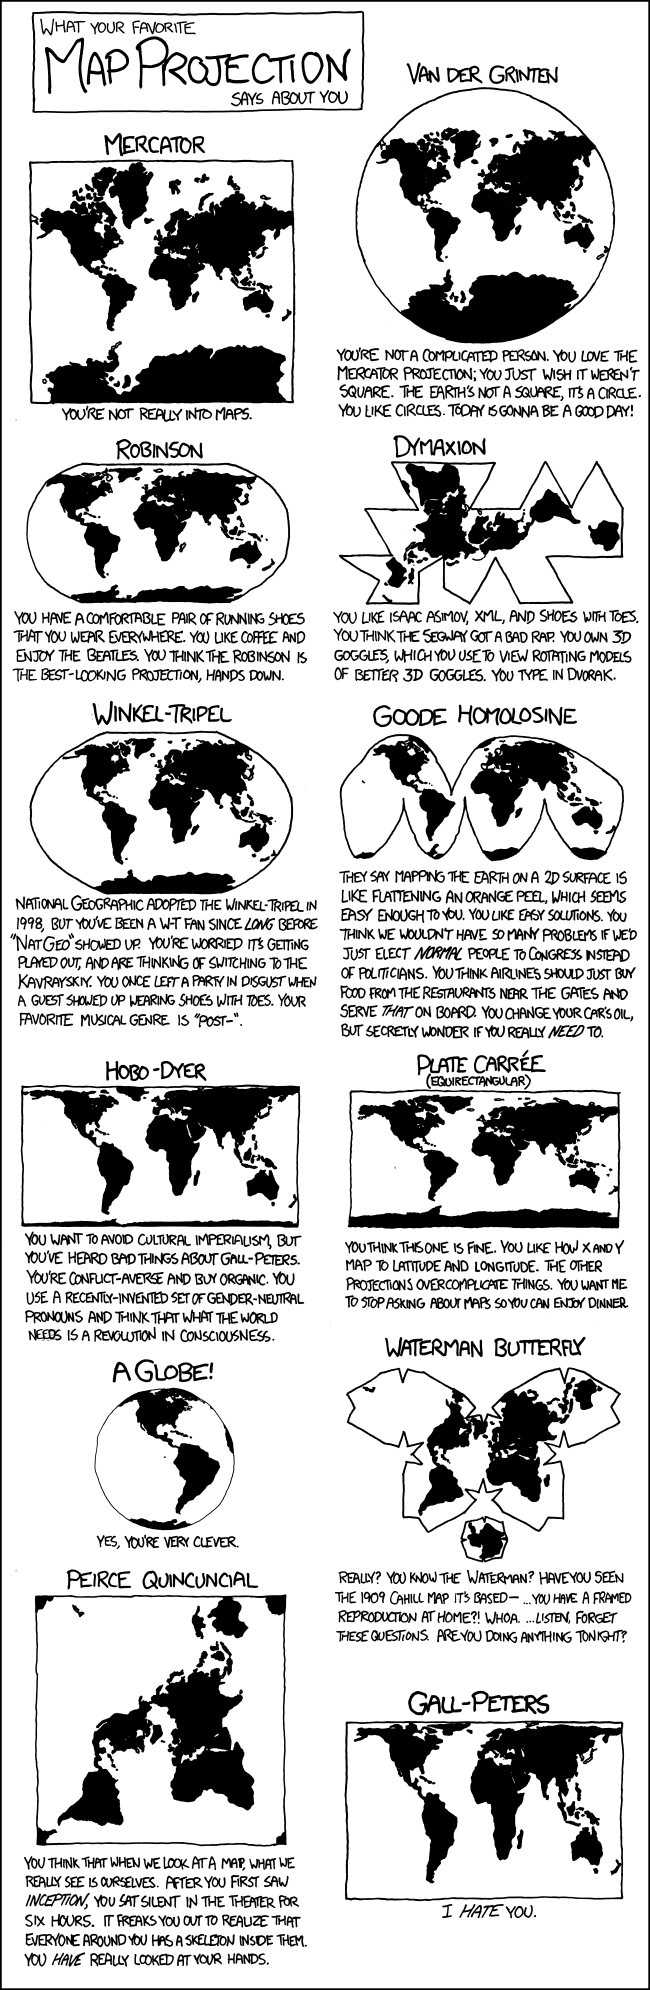 xkcd comic strip on map projection